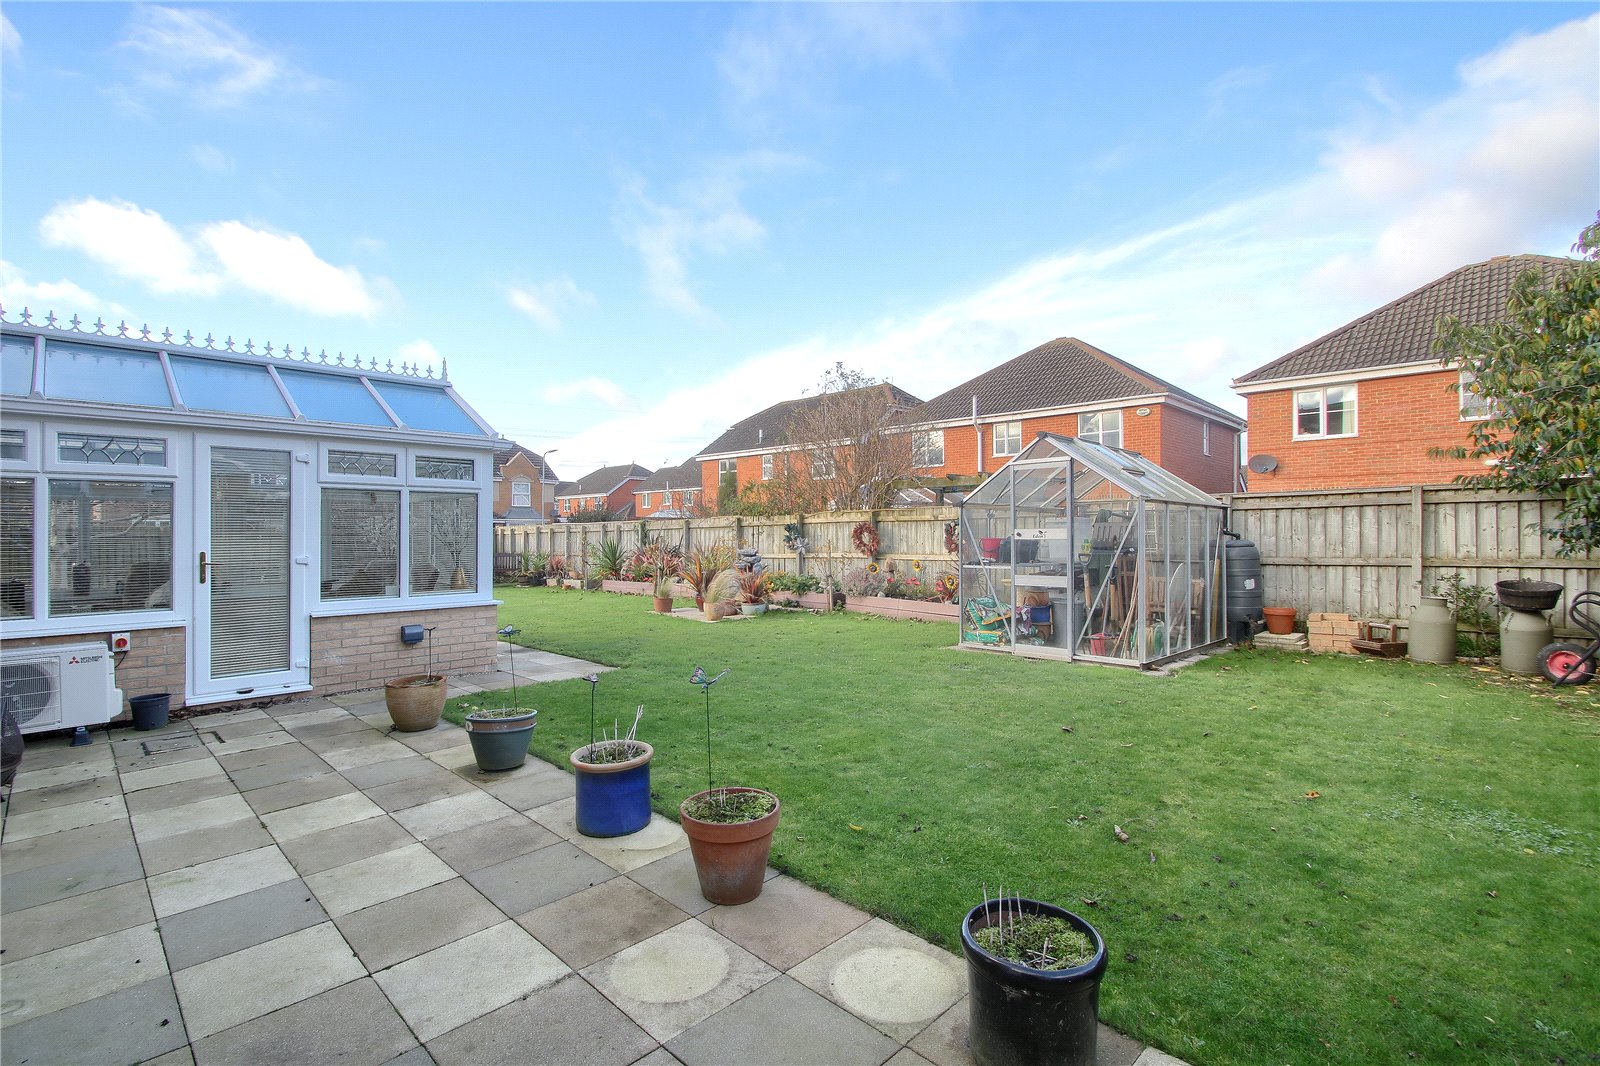 4 bed house for sale in Chaldron Way, Eaglescliffe  - Property Image 3